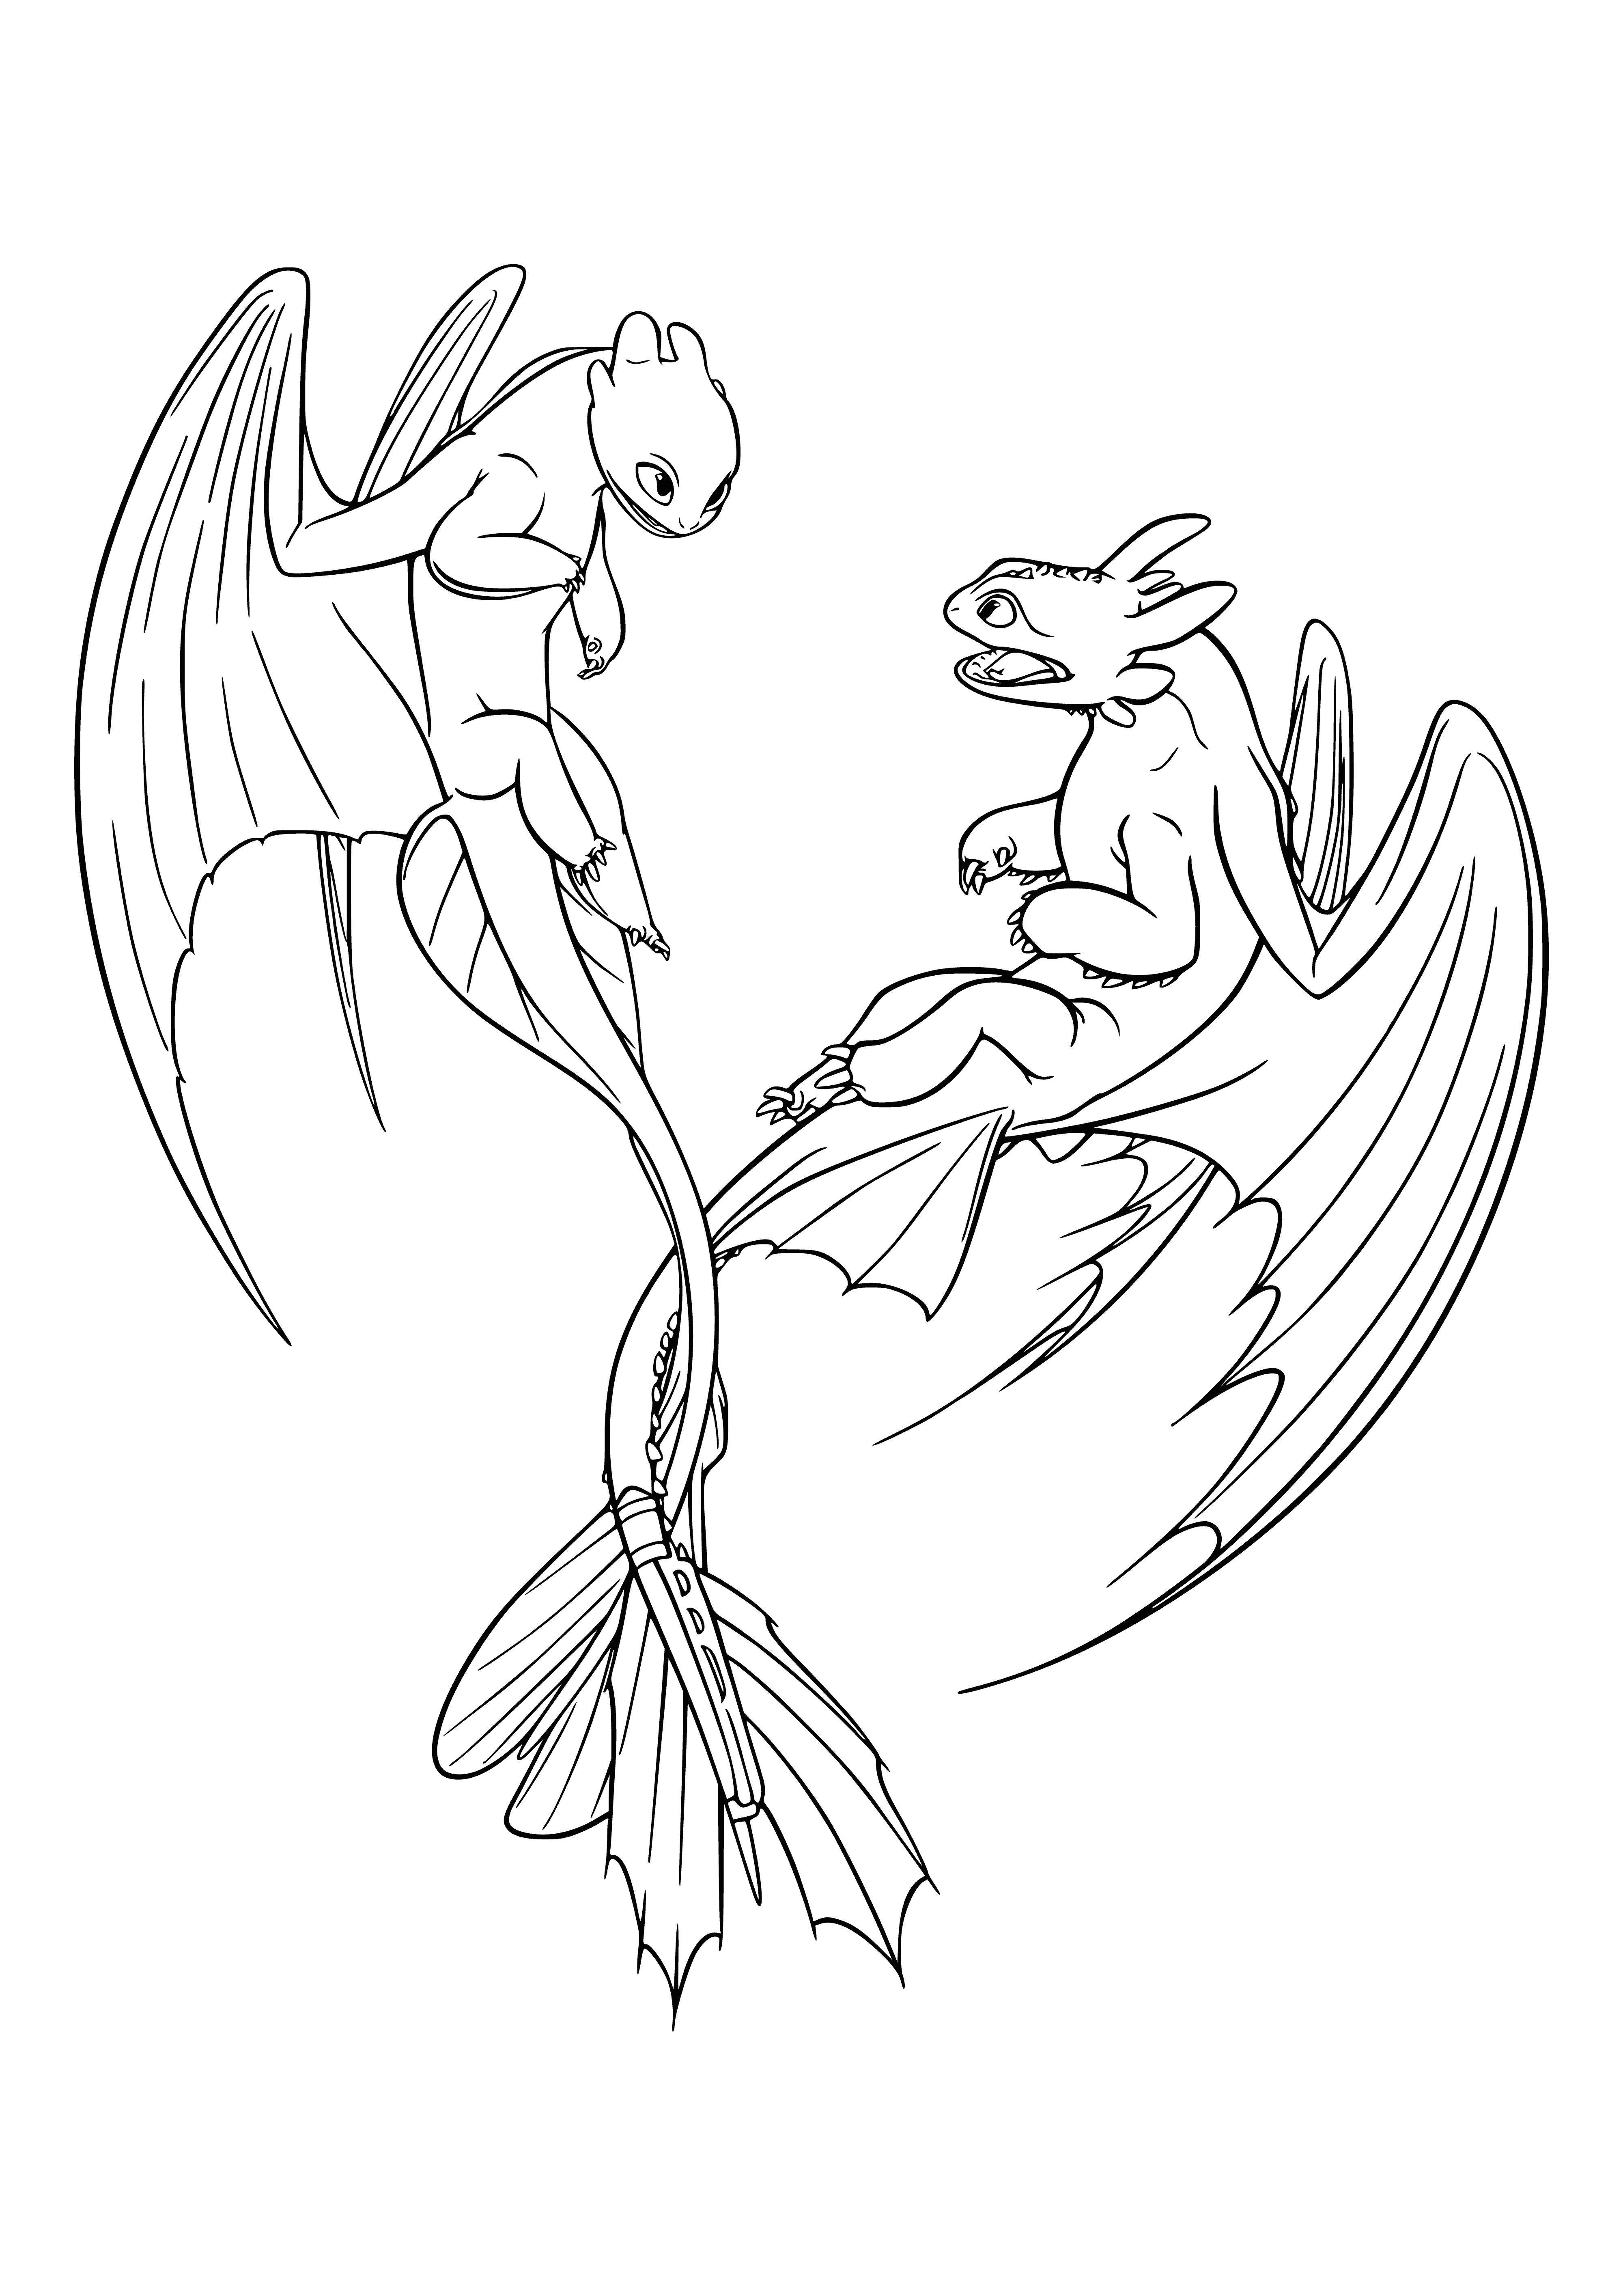 coloring page: Dragon with green scales, boy & small creature riding it, flying through air with dog-like creature on its head.